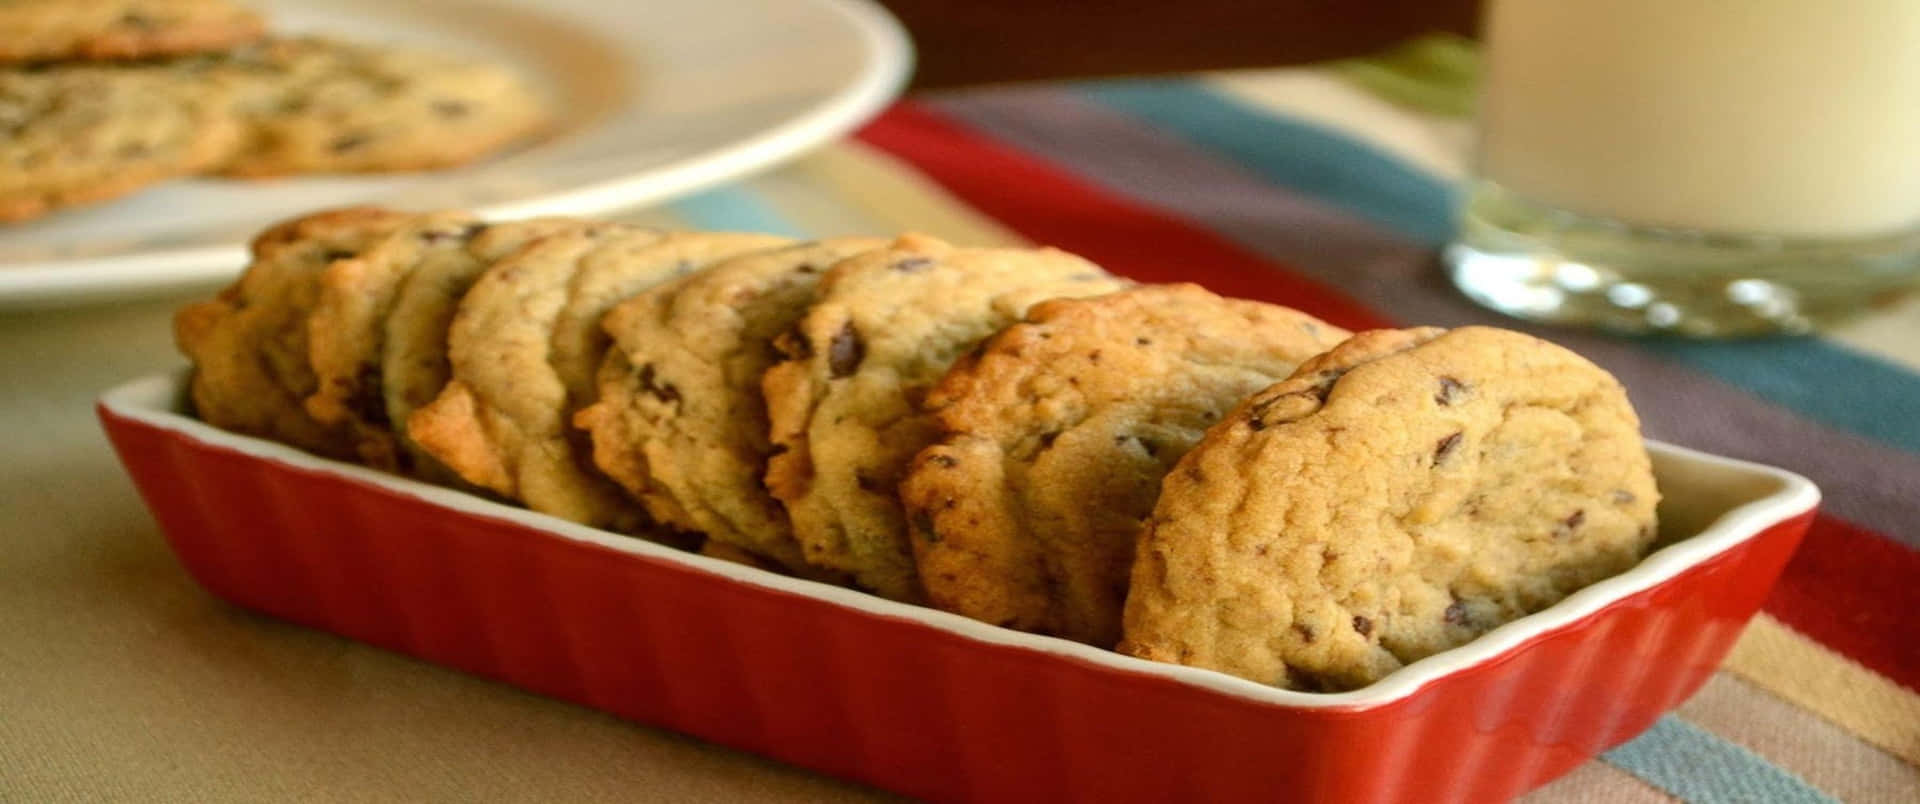 Delicious Small And Flat Dessert 3440x1440p Cookies Background